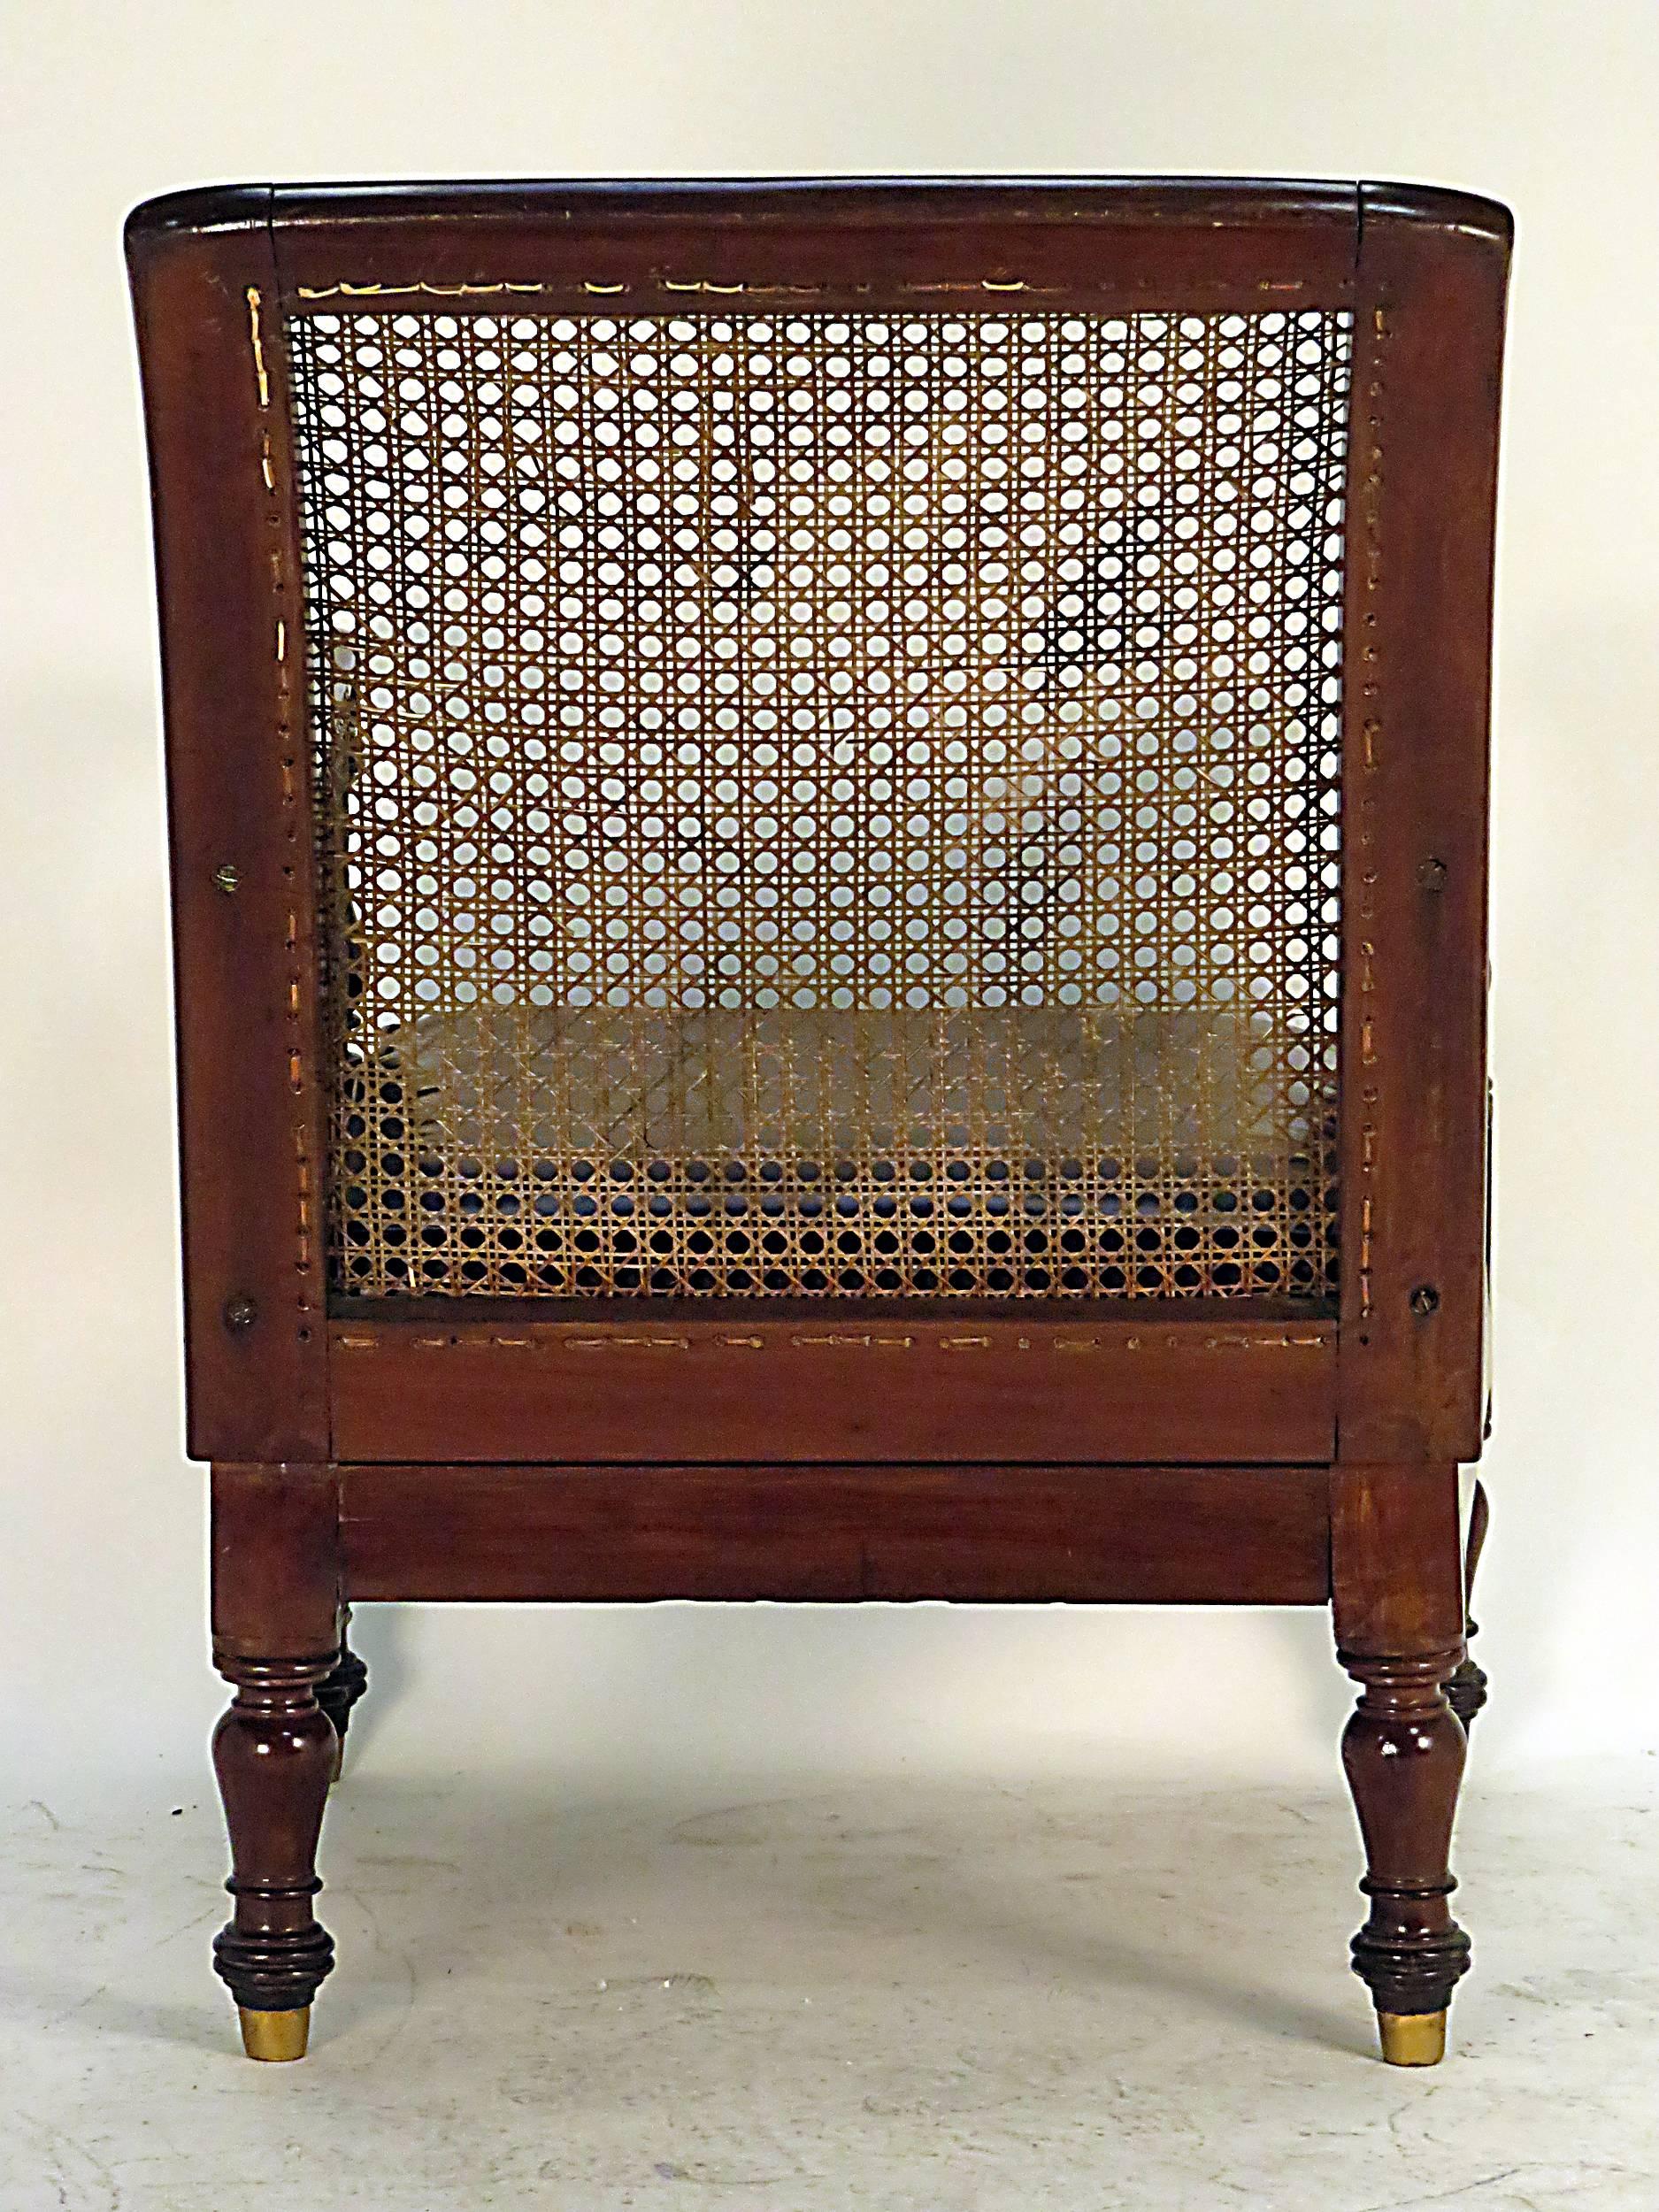 Regency Edwardian English Mahogany Library Chair with a Leather Seat England, circa 1900